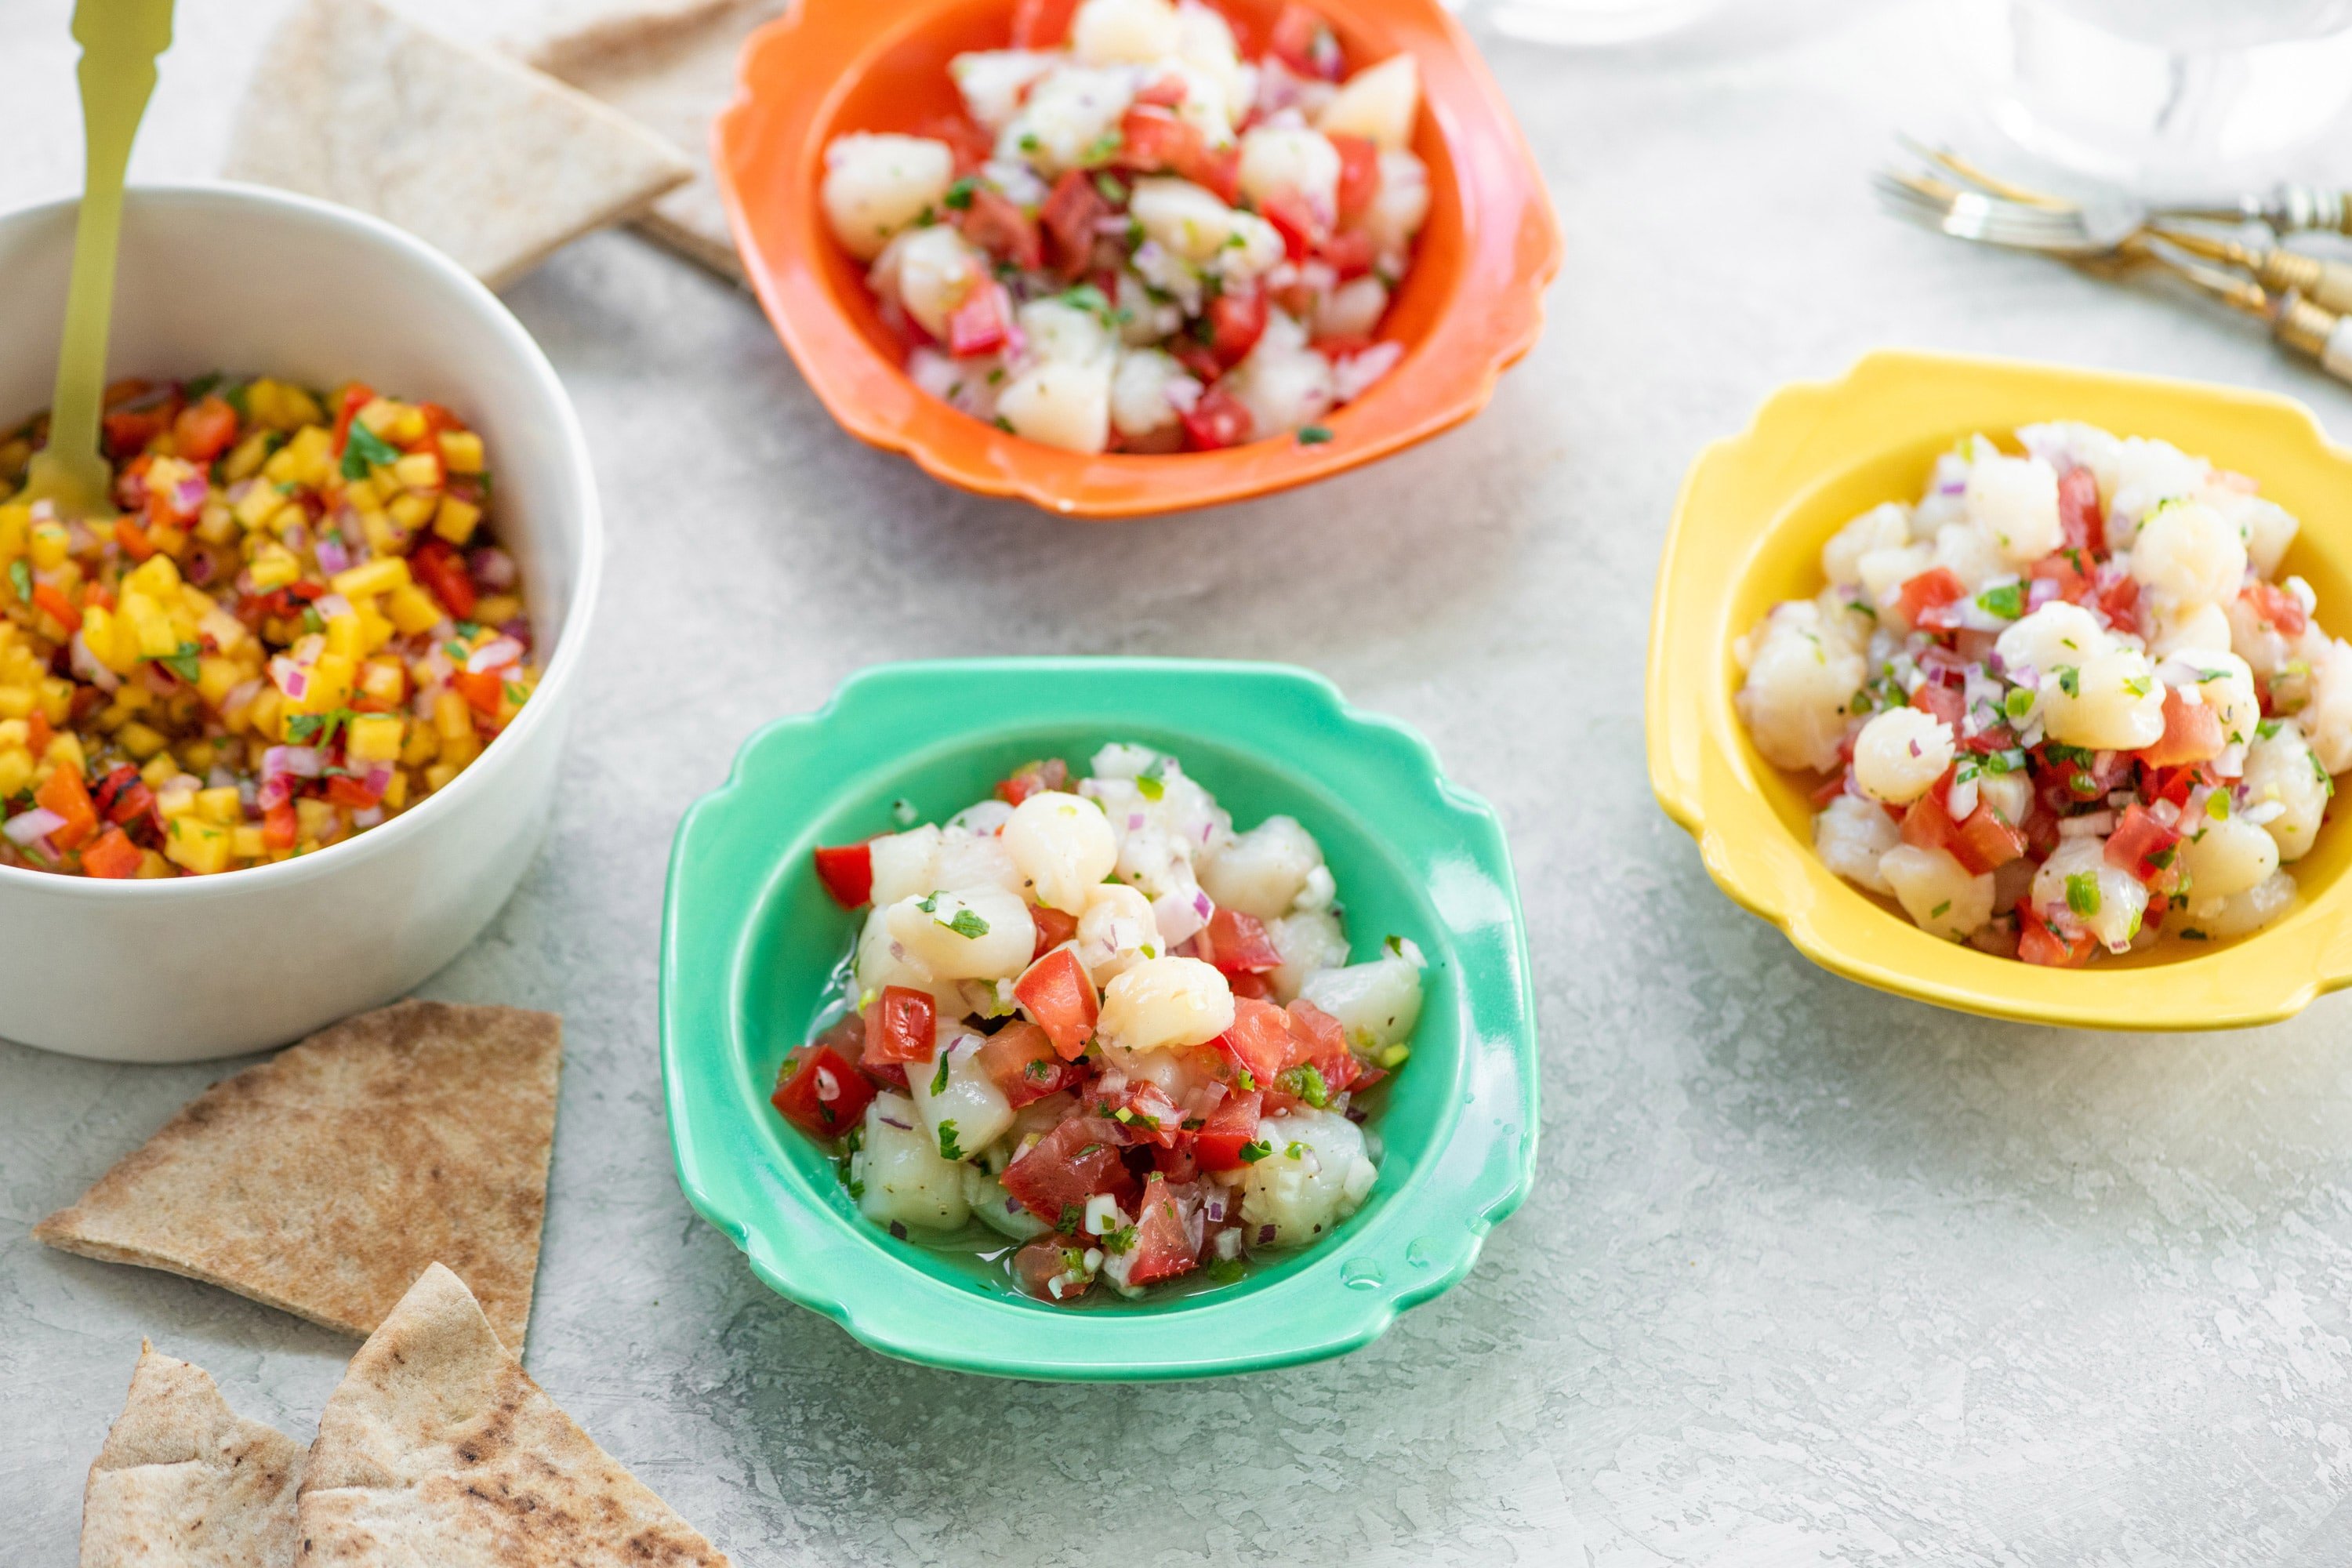 Little bowls of scallop ceviche with fruit salsa in a serving bowl.